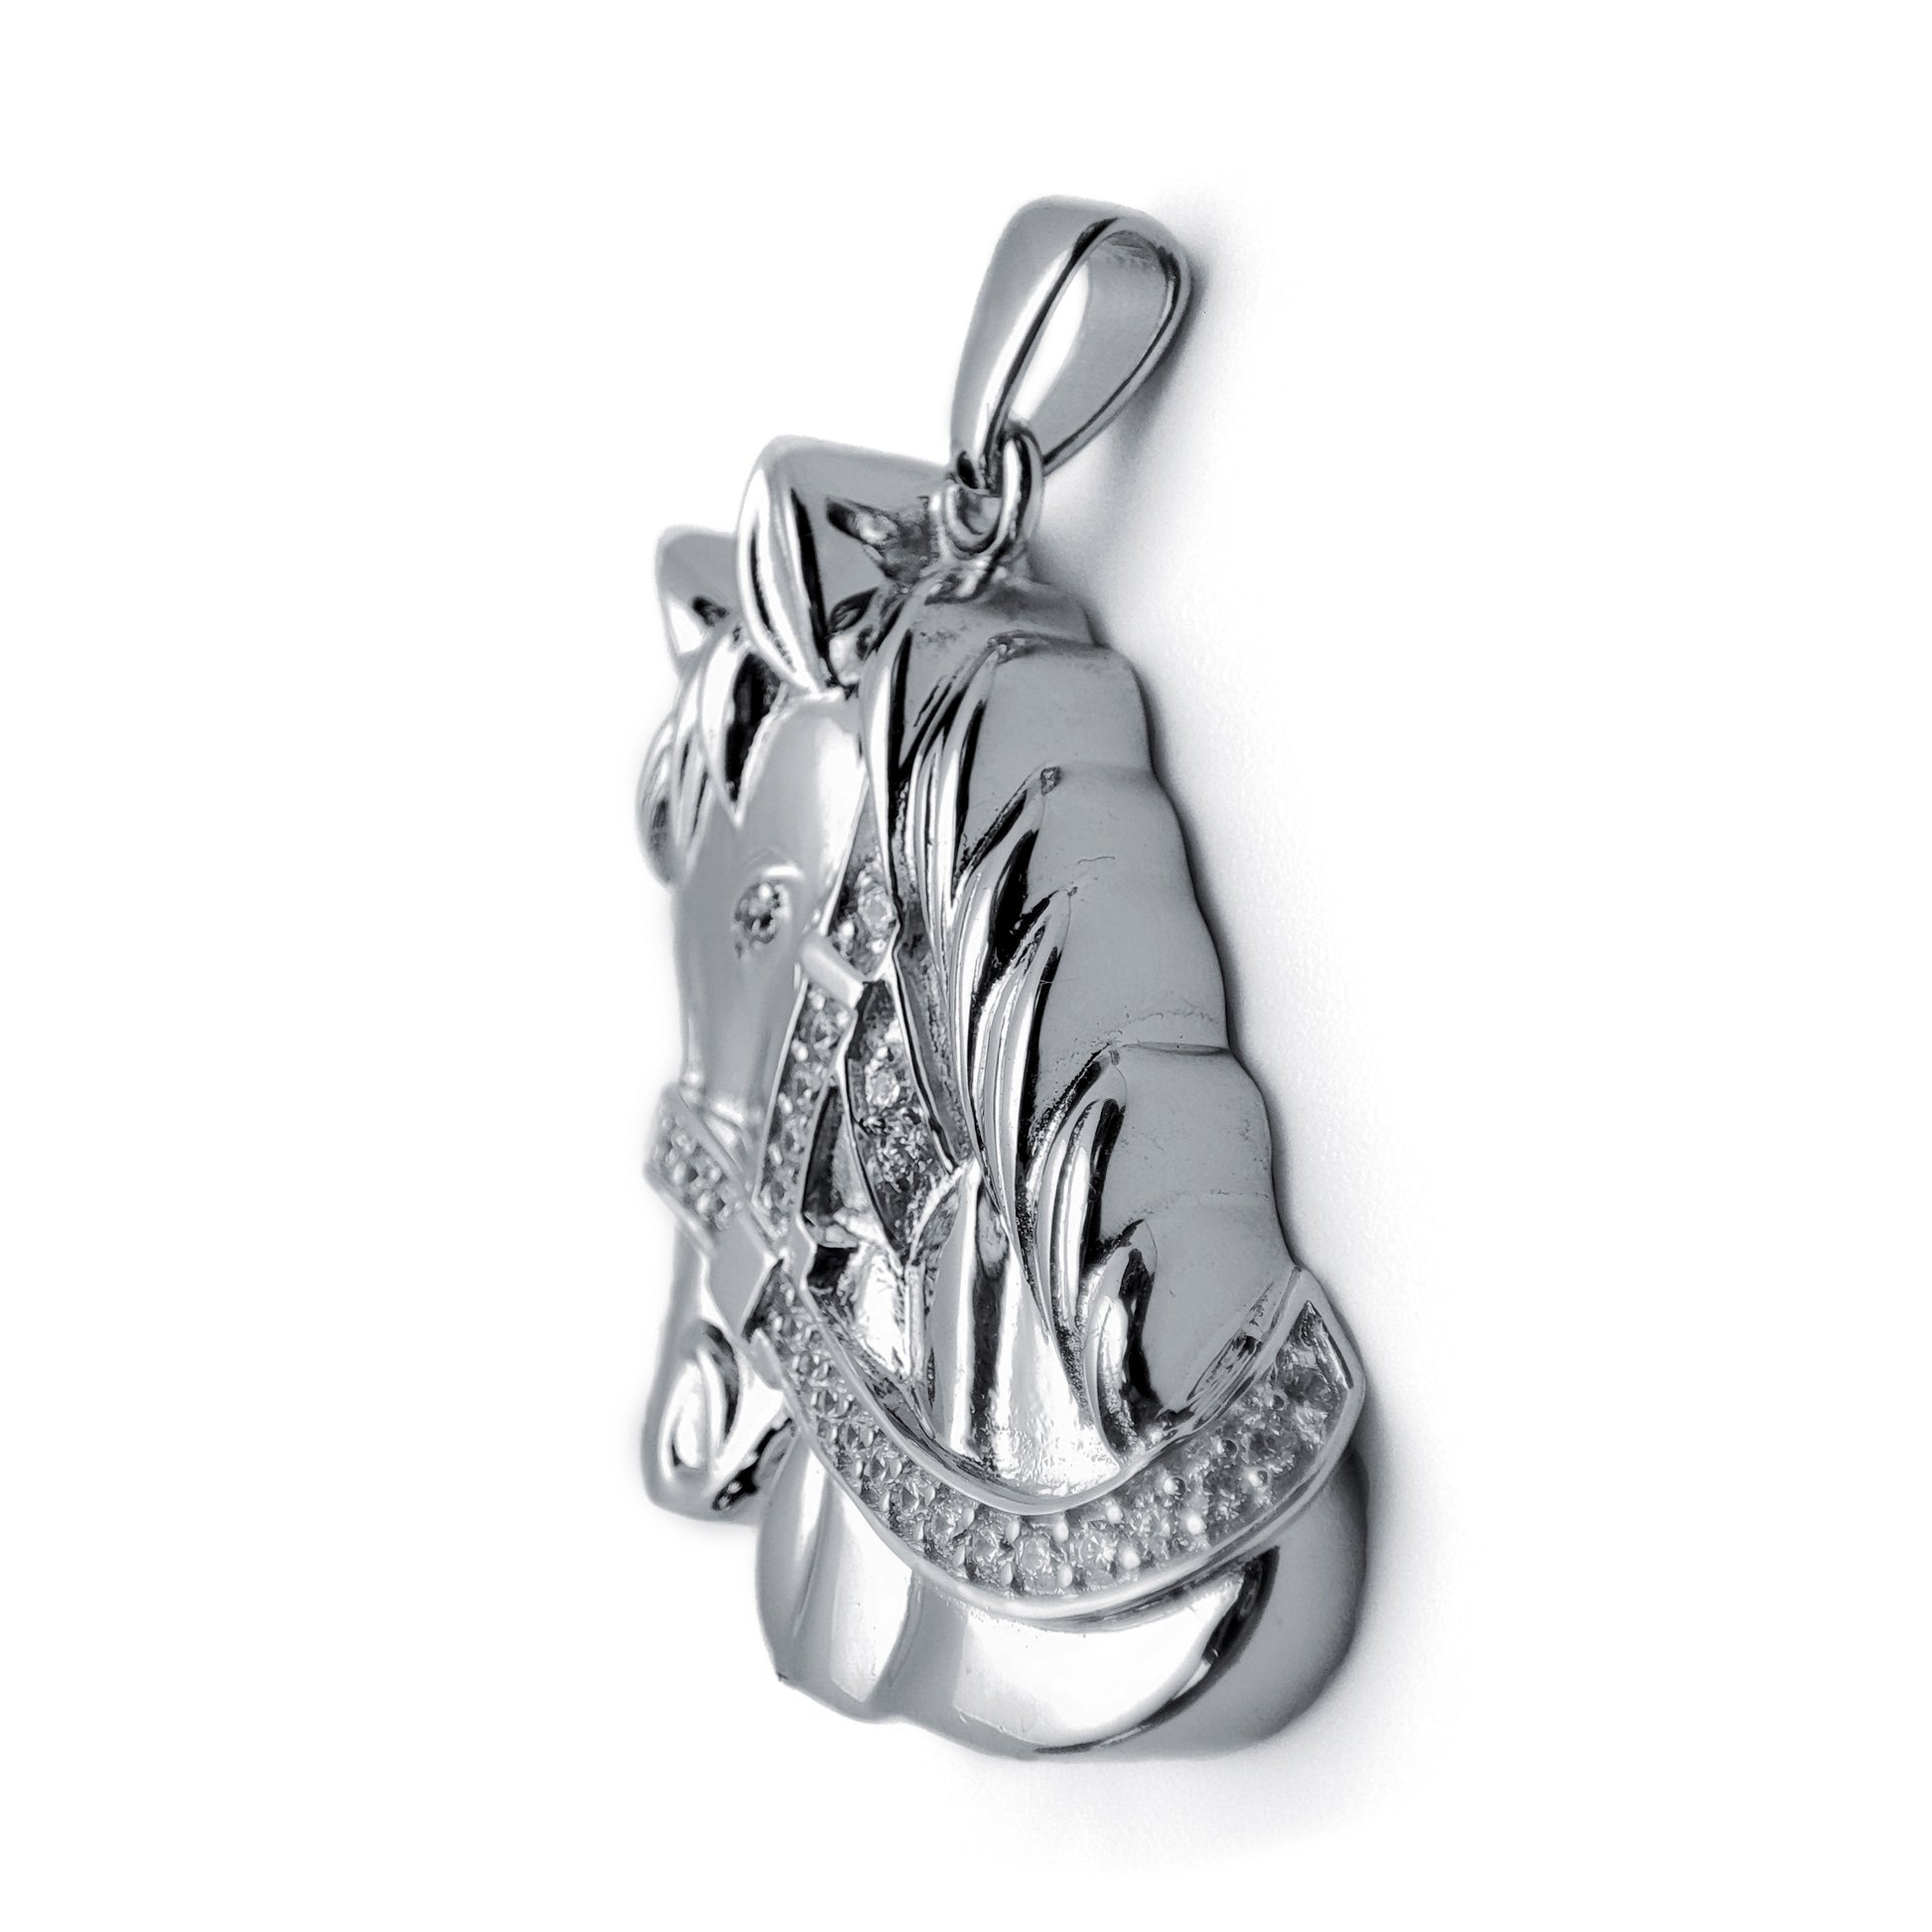 Sterling Silver  CZ Horse Charm Pendant - 18 inch Chain - APD032